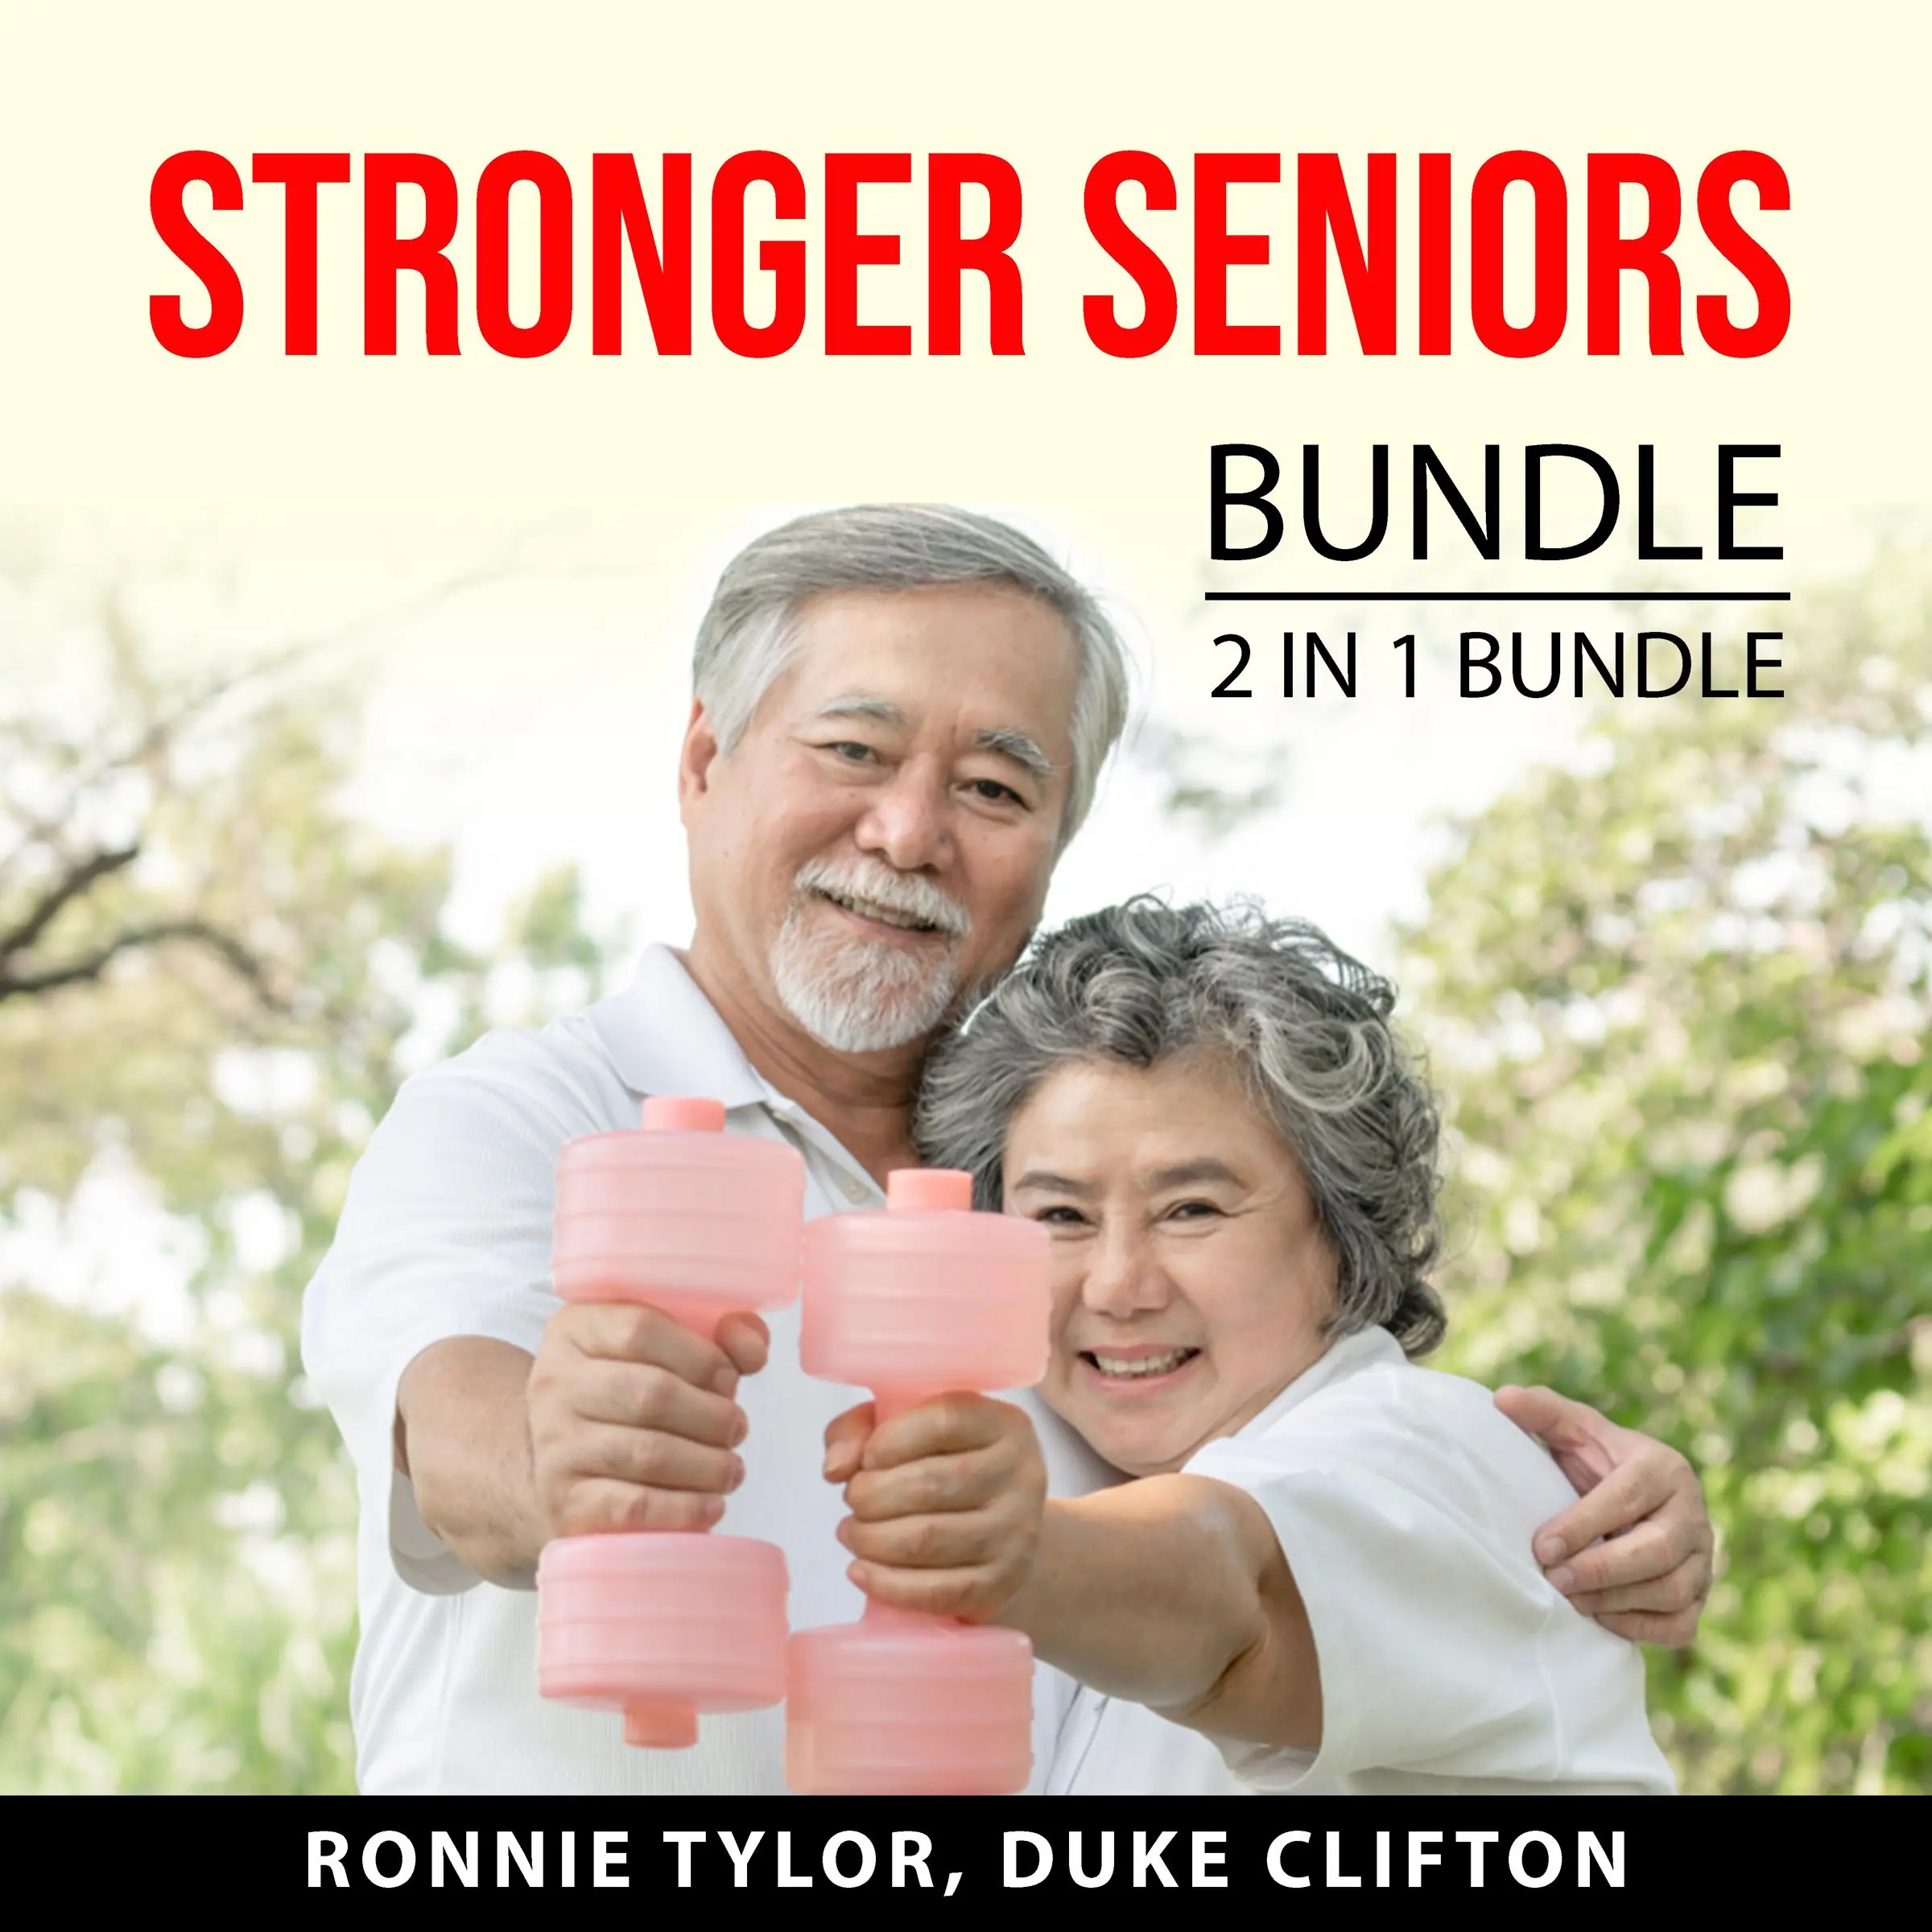 Stronger Seniors Bundle, 2 IN 1 Bundle: Rock Steady and Stretching for Seniors Audiobook by Duke Clifton